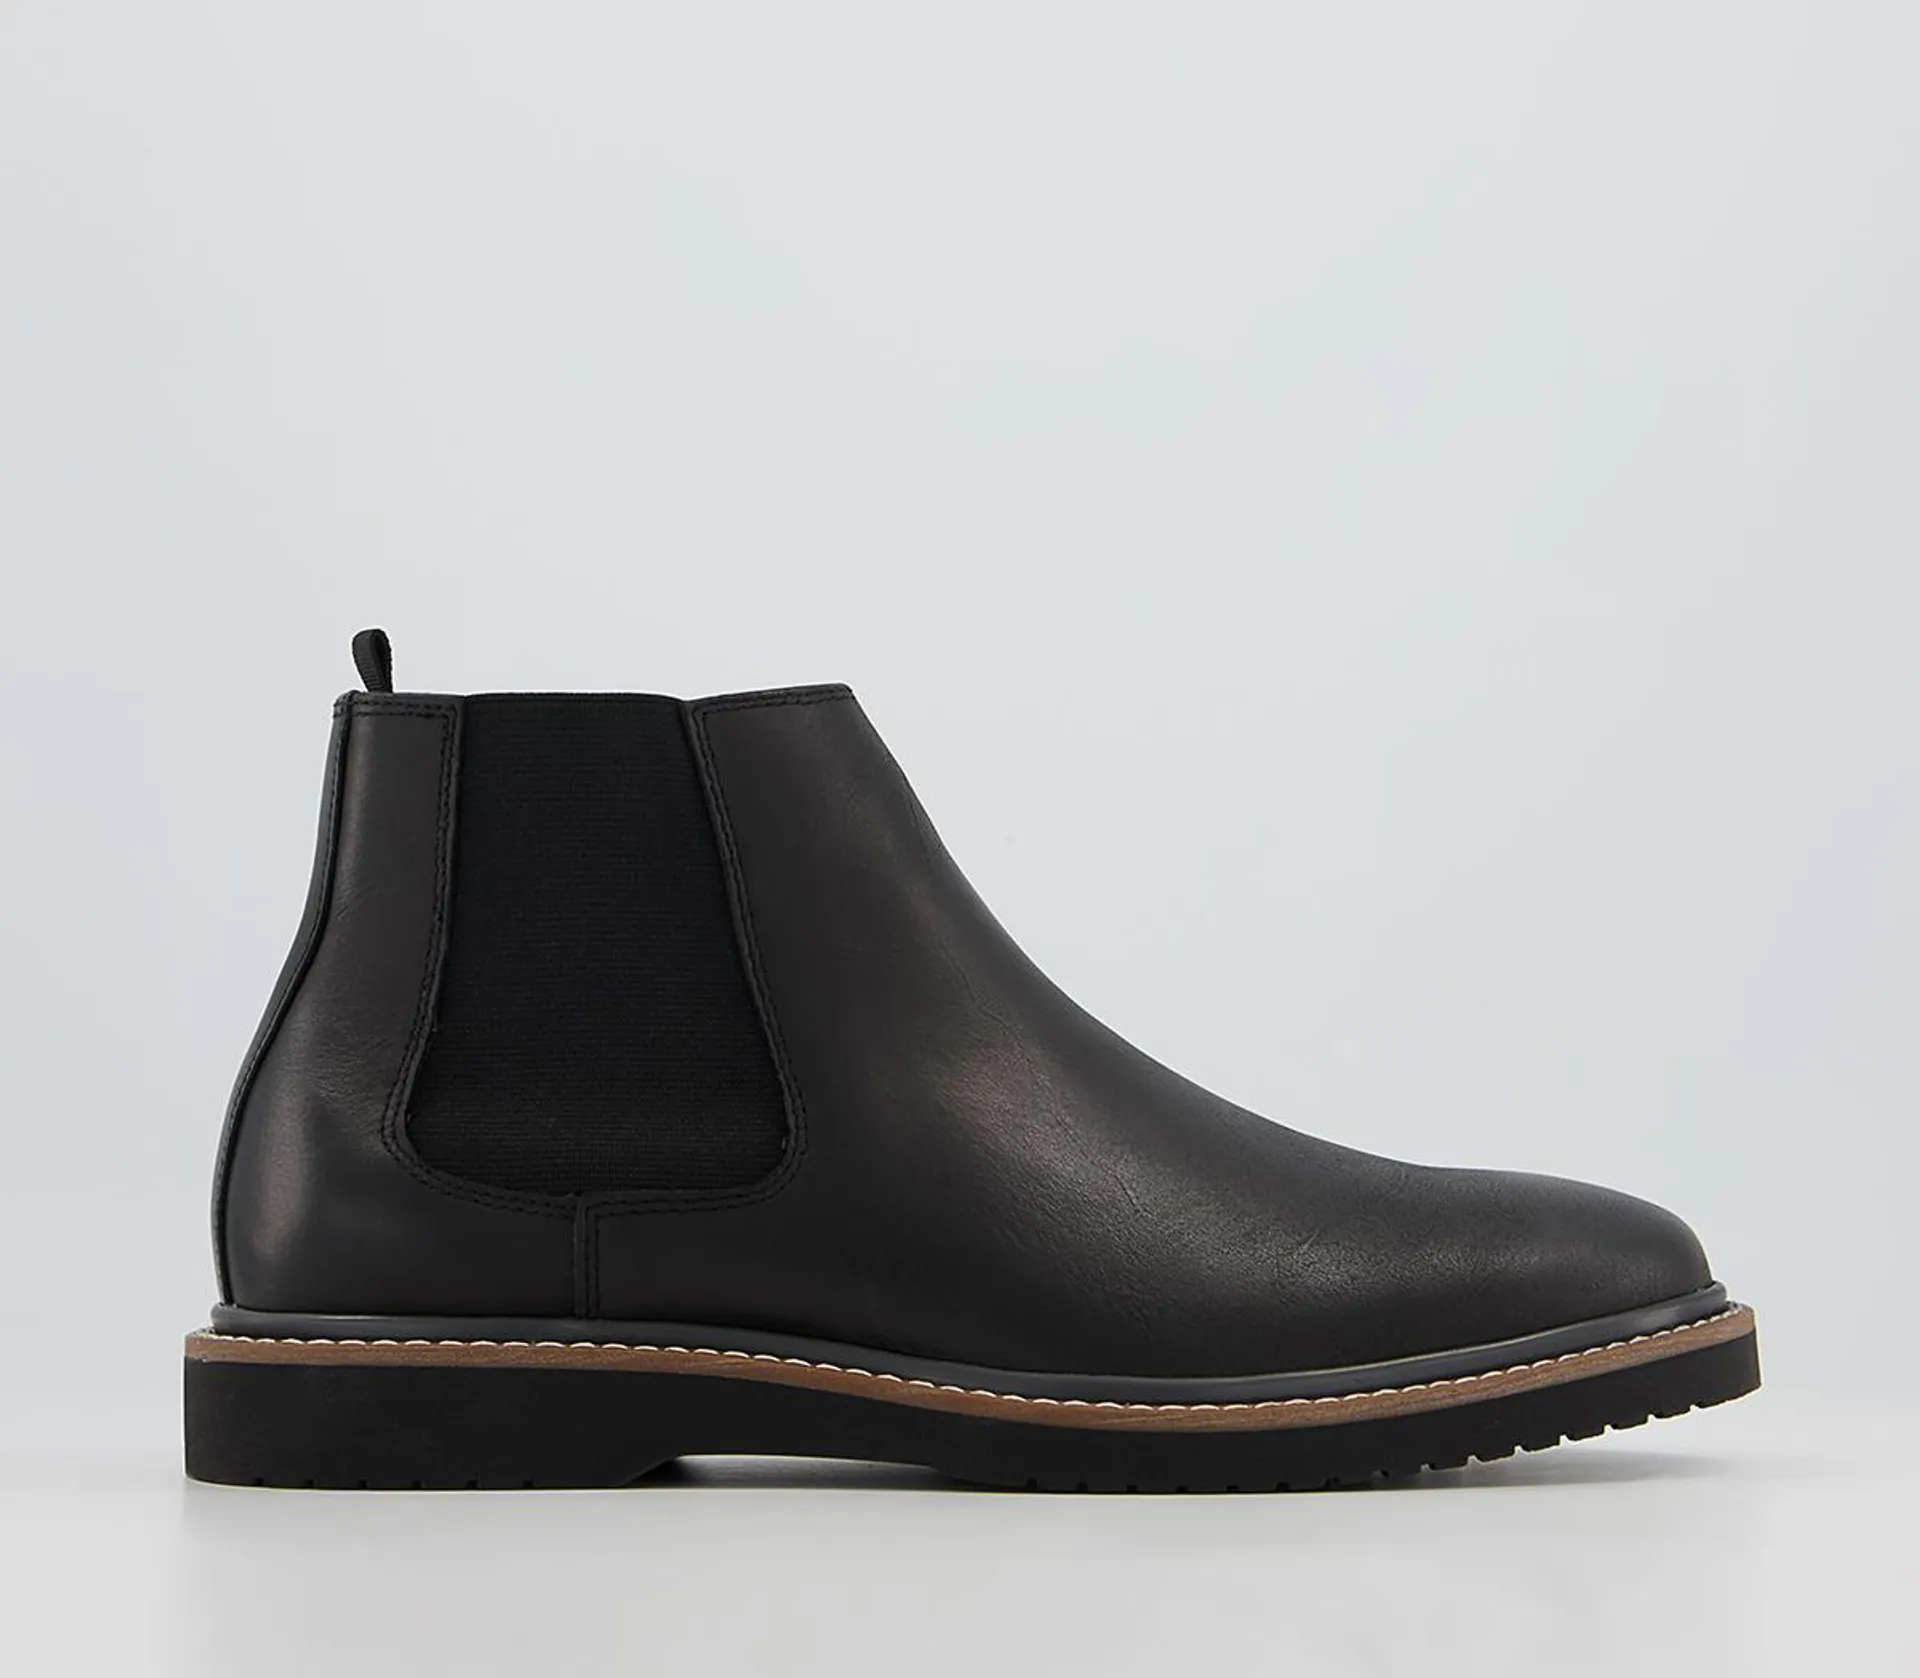 Bolton Wedge Chelsea Boots